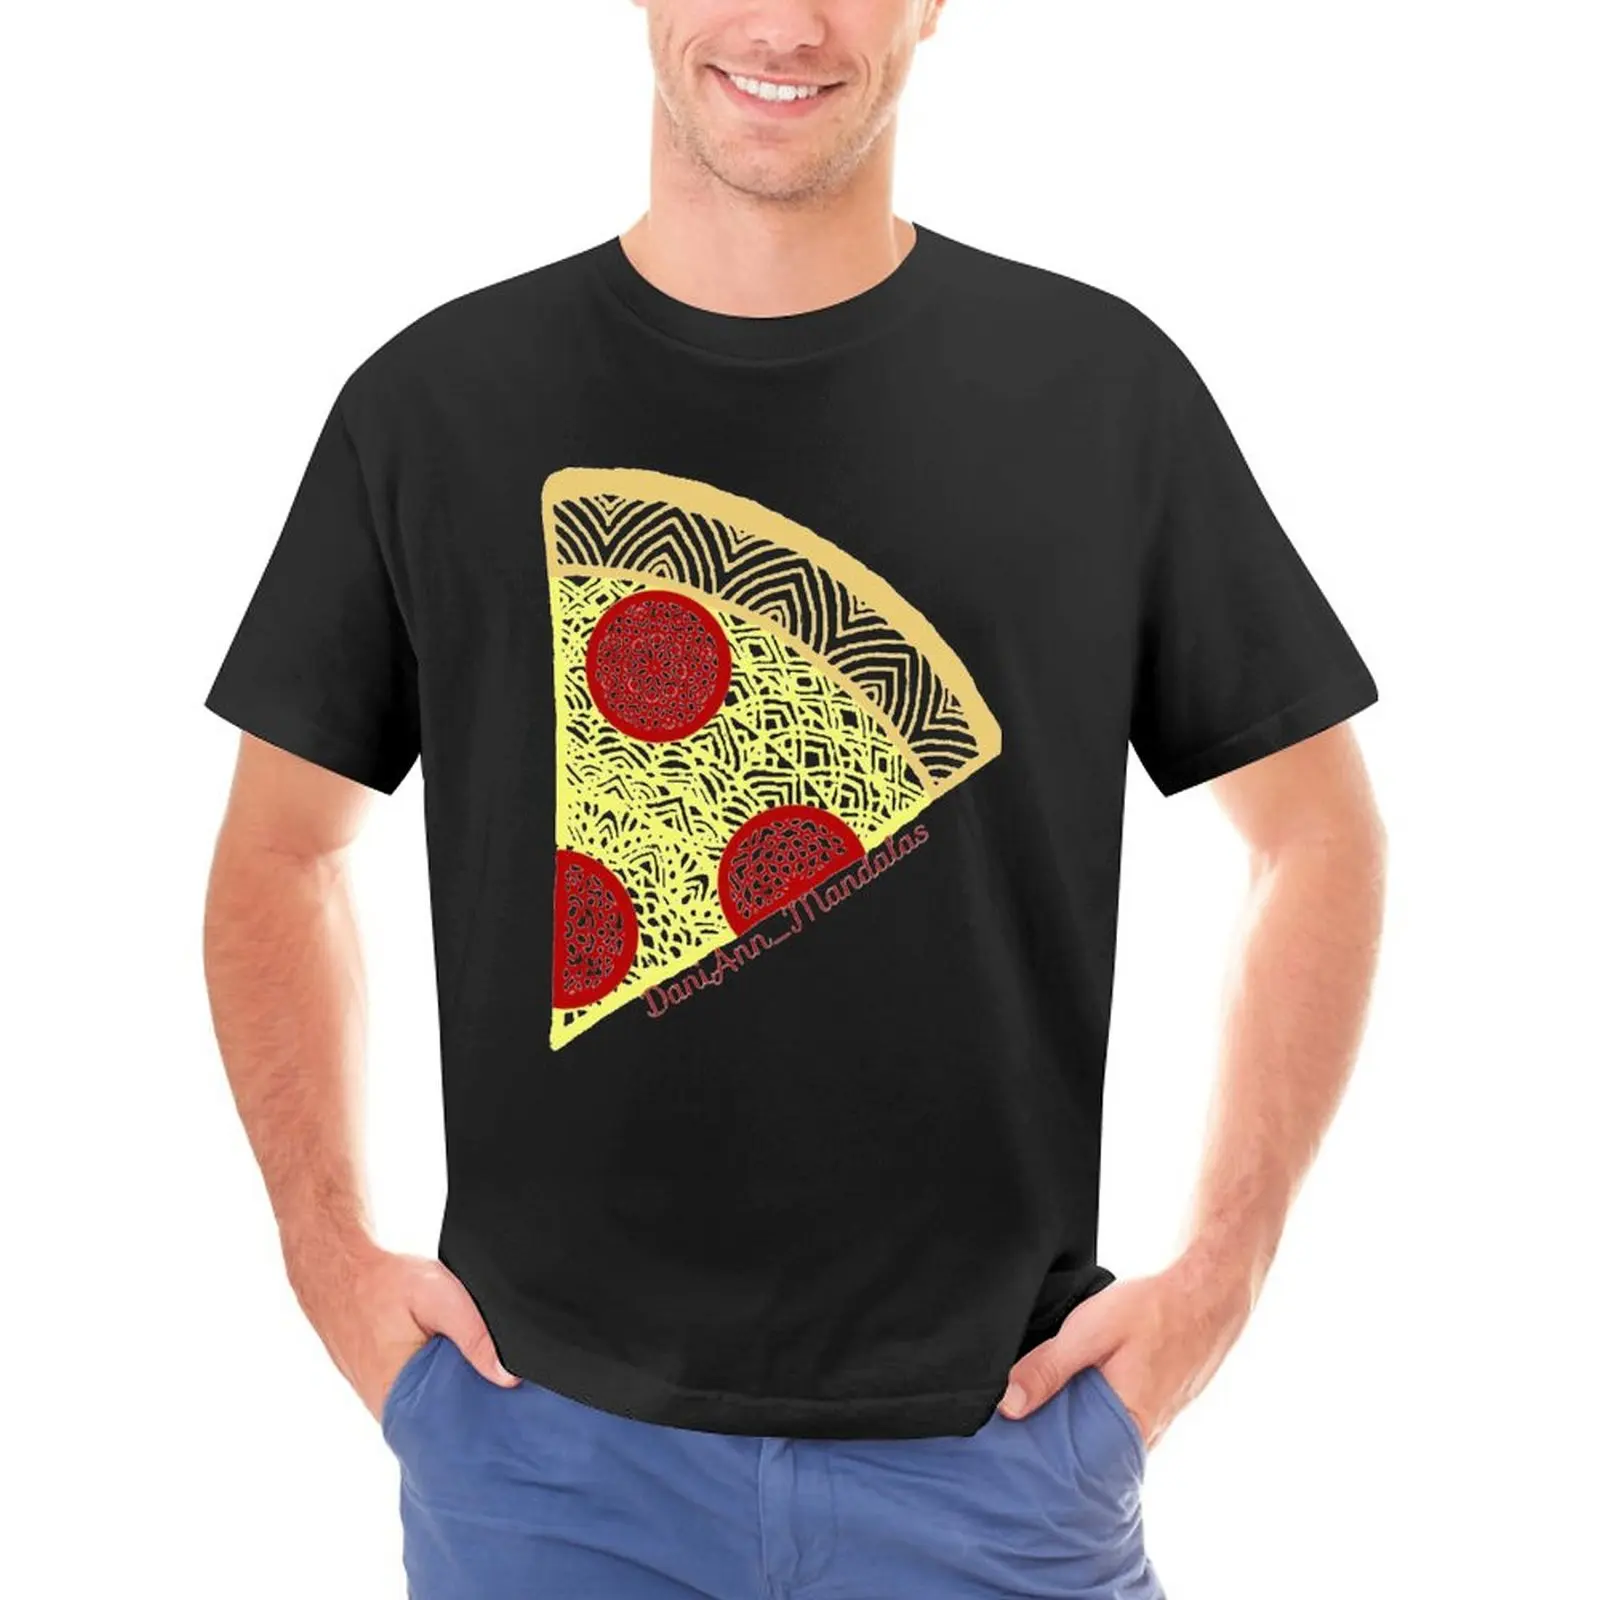 

Mandala Pizza T Shirt Pepperoni Cheese Crust Food Trending Cotton T-Shirt Short Sleeve Printed Basic Clothes for Man Couple Tees